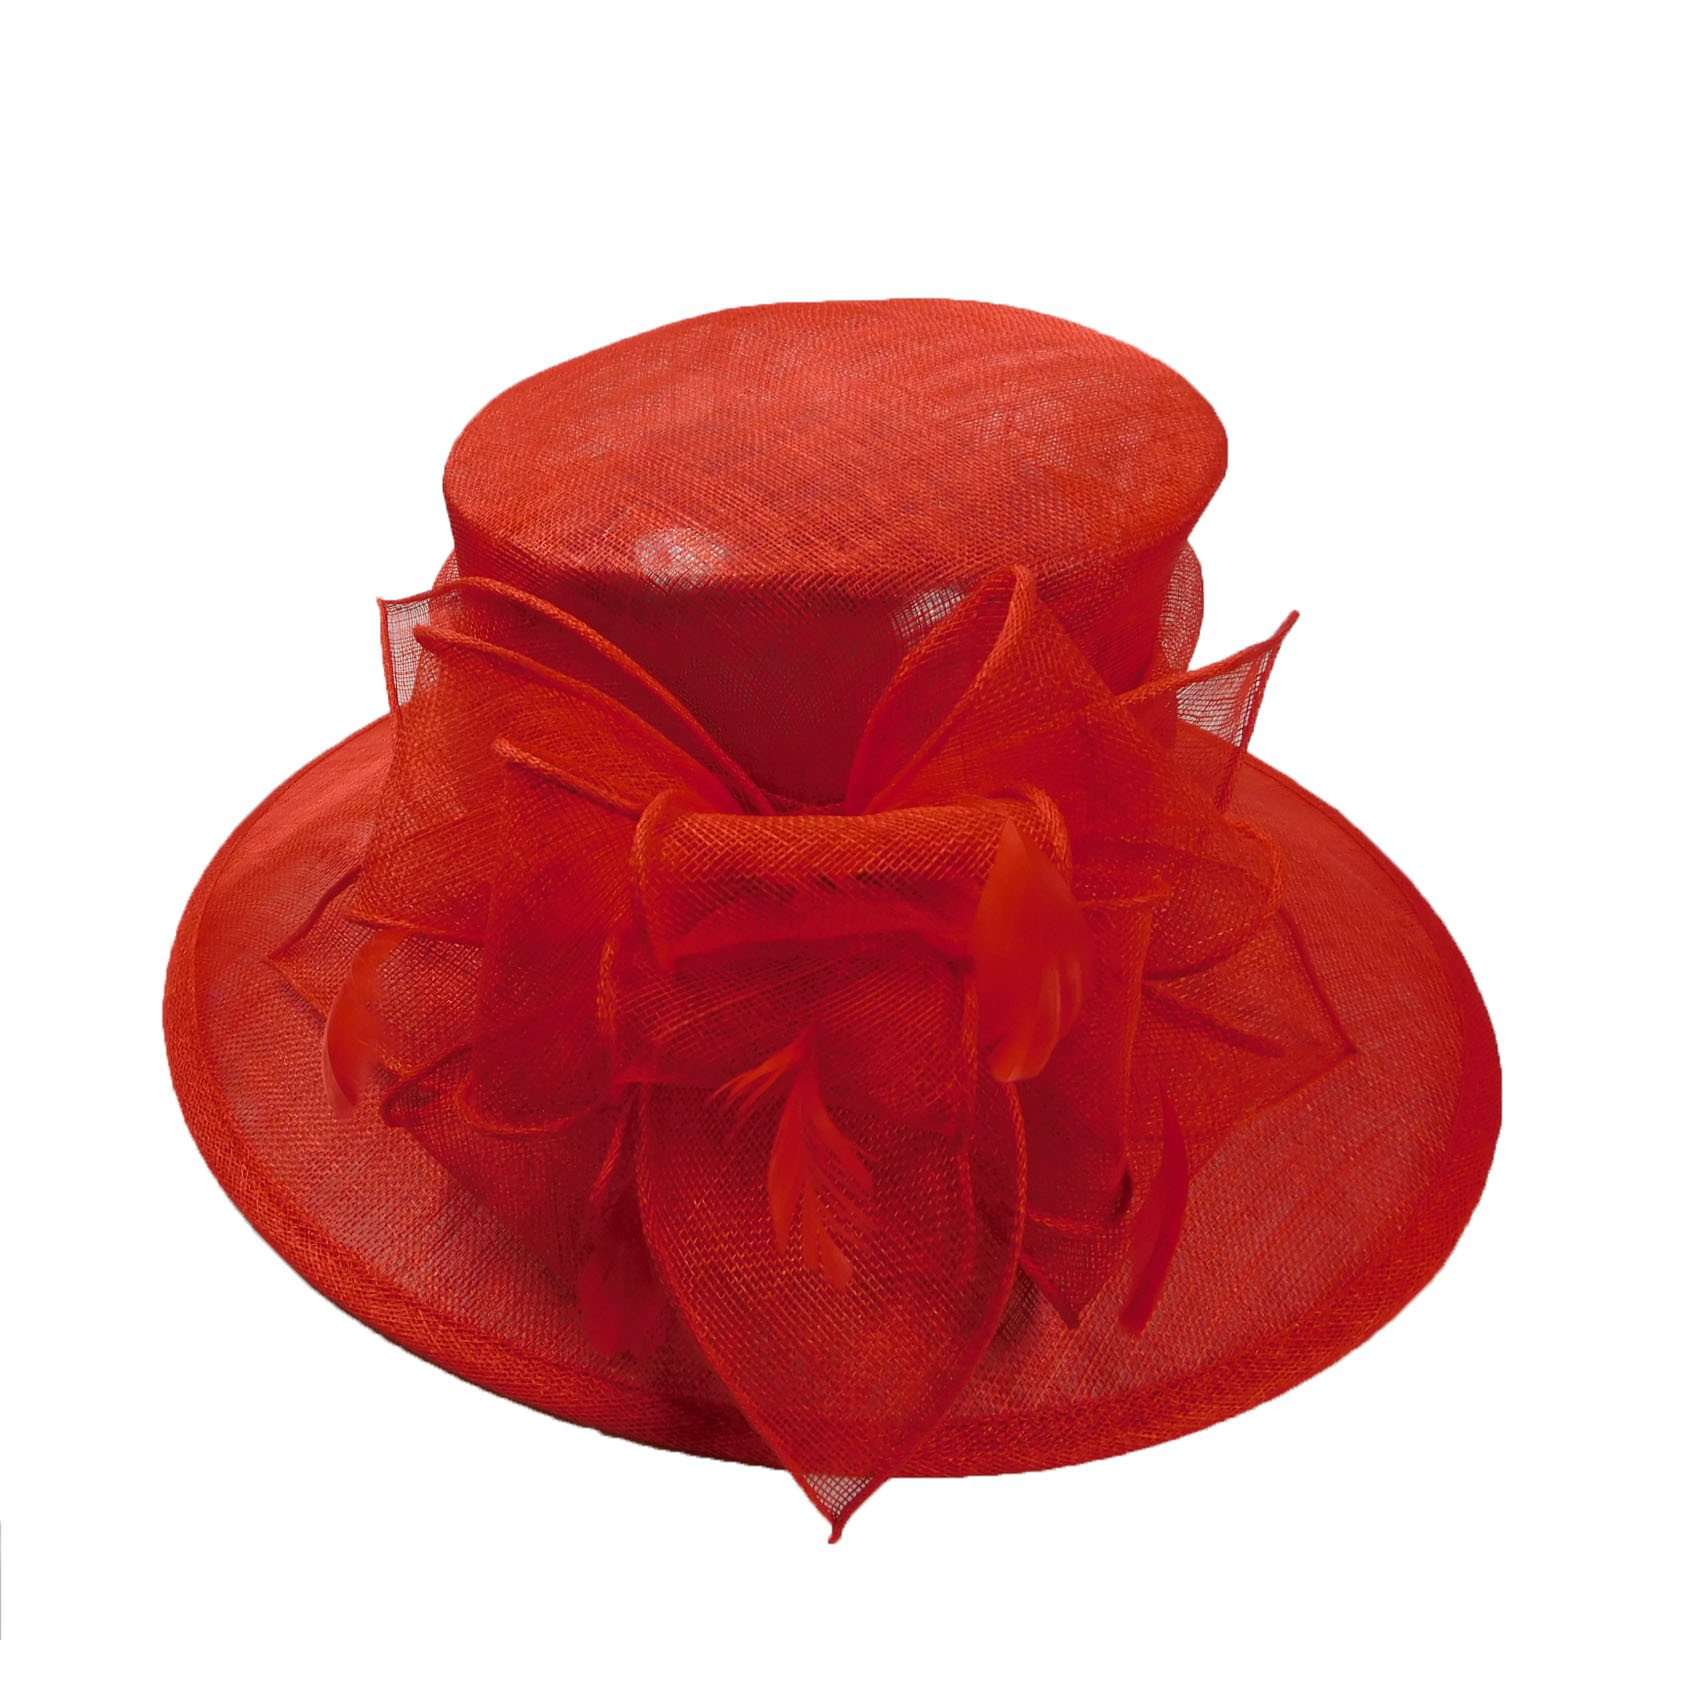 Downturned Brim Sinamay Dress Hat Dress Hat Something Special LA WSSY750RD Red  